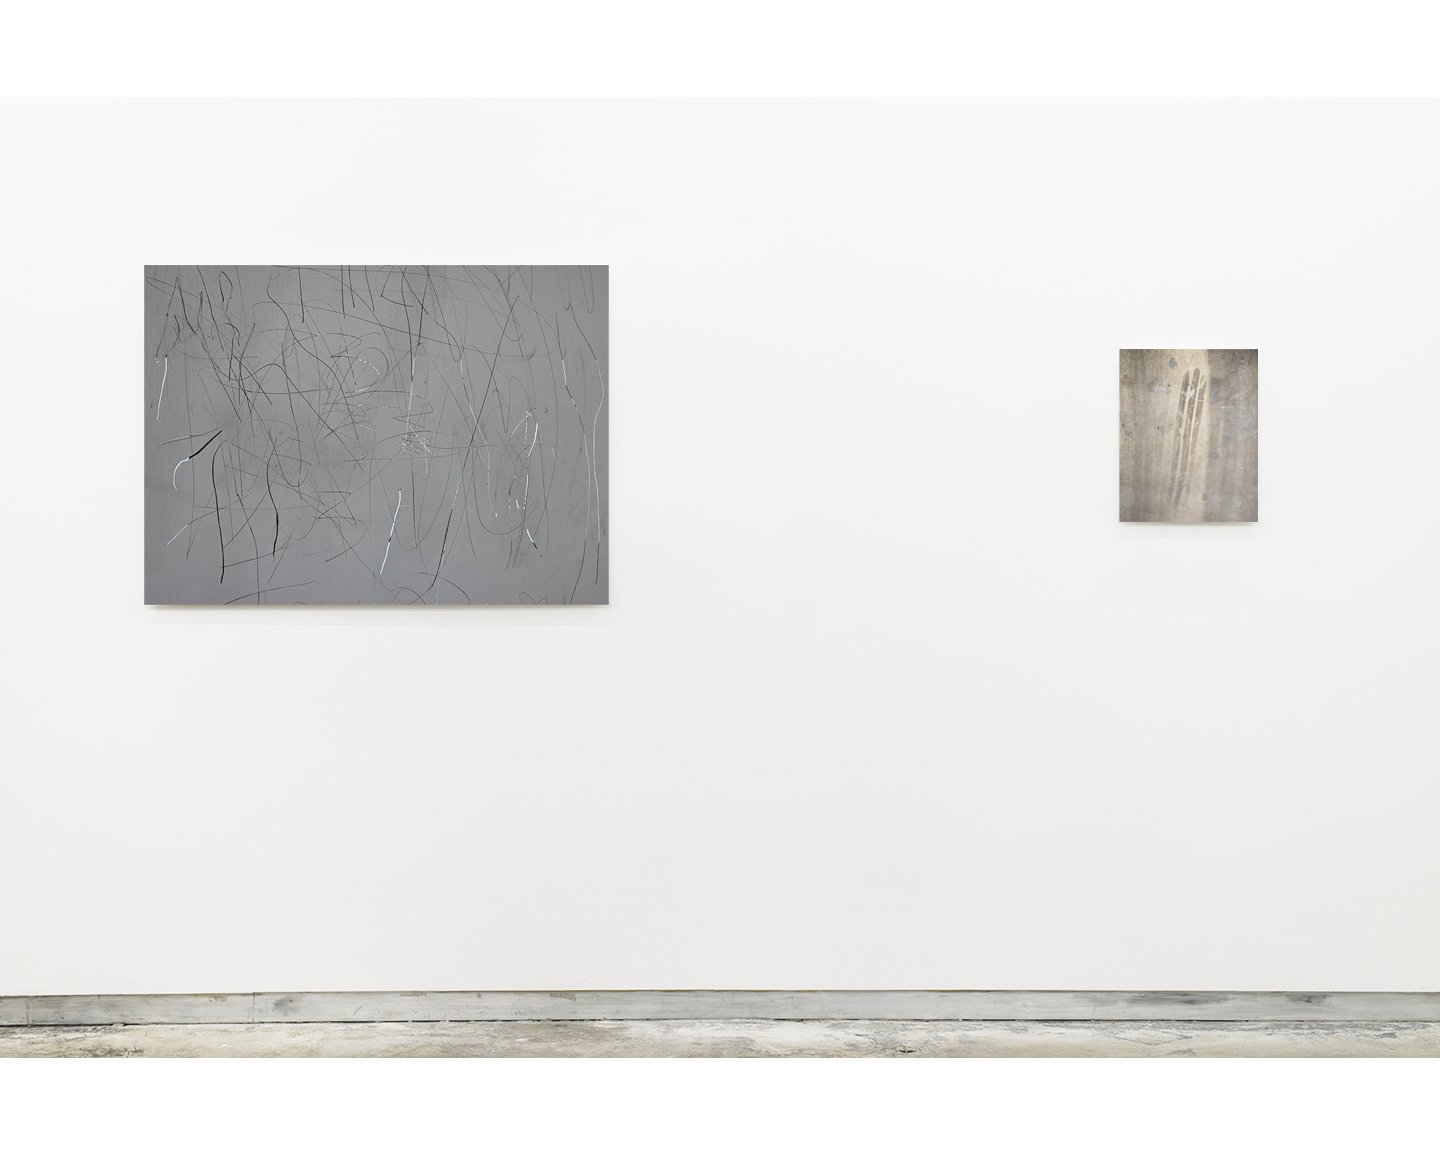  Installation View  Low Relief  Kate Werble Gallery, New York February - March 2013 